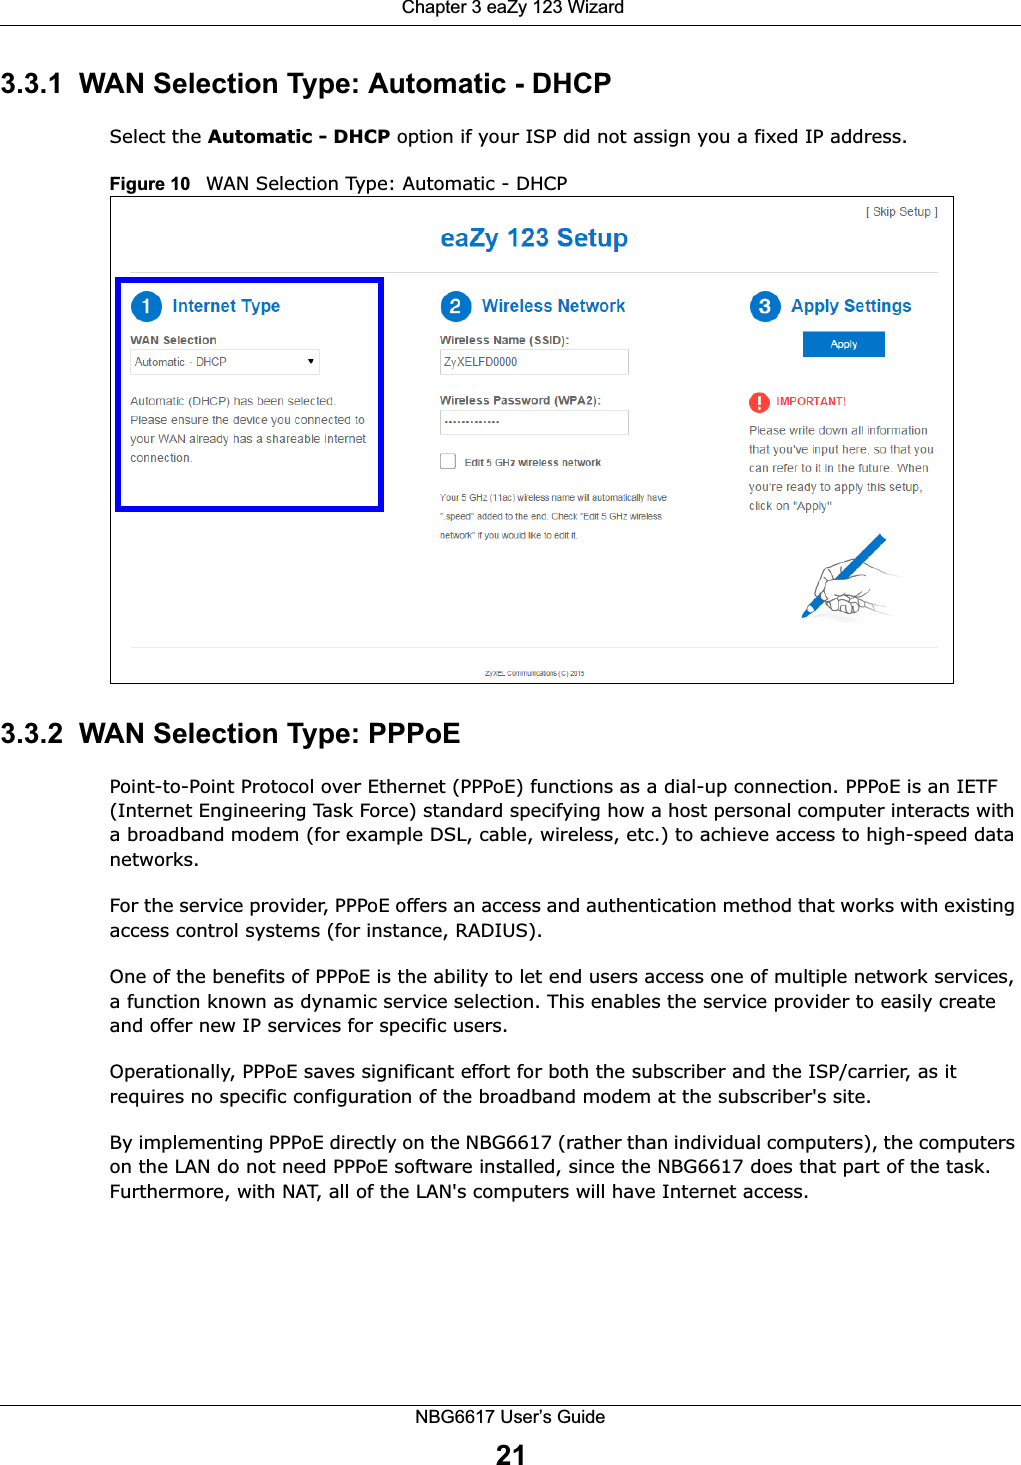  Chapter 3 eaZy 123 WizardNBG6617 User’s Guide213.3.1  WAN Selection Type: Automatic - DHCPSelect the Automatic - DHCP option if your ISP did not assign you a fixed IP address.Figure 10   WAN Selection Type: Automatic - DHCP3.3.2  WAN Selection Type: PPPoEPoint-to-Point Protocol over Ethernet (PPPoE) functions as a dial-up connection. PPPoE is an IETF (Internet Engineering Task Force) standard specifying how a host personal computer interacts with a broadband modem (for example DSL, cable, wireless, etc.) to achieve access to high-speed data networks.For the service provider, PPPoE offers an access and authentication method that works with existing access control systems (for instance, RADIUS). One of the benefits of PPPoE is the ability to let end users access one of multiple network services, a function known as dynamic service selection. This enables the service provider to easily create and offer new IP services for specific users.Operationally, PPPoE saves significant effort for both the subscriber and the ISP/carrier, as it requires no specific configuration of the broadband modem at the subscriber&apos;s site.By implementing PPPoE directly on the NBG6617 (rather than individual computers), the computers on the LAN do not need PPPoE software installed, since the NBG6617 does that part of the task. Furthermore, with NAT, all of the LAN&apos;s computers will have Internet access.